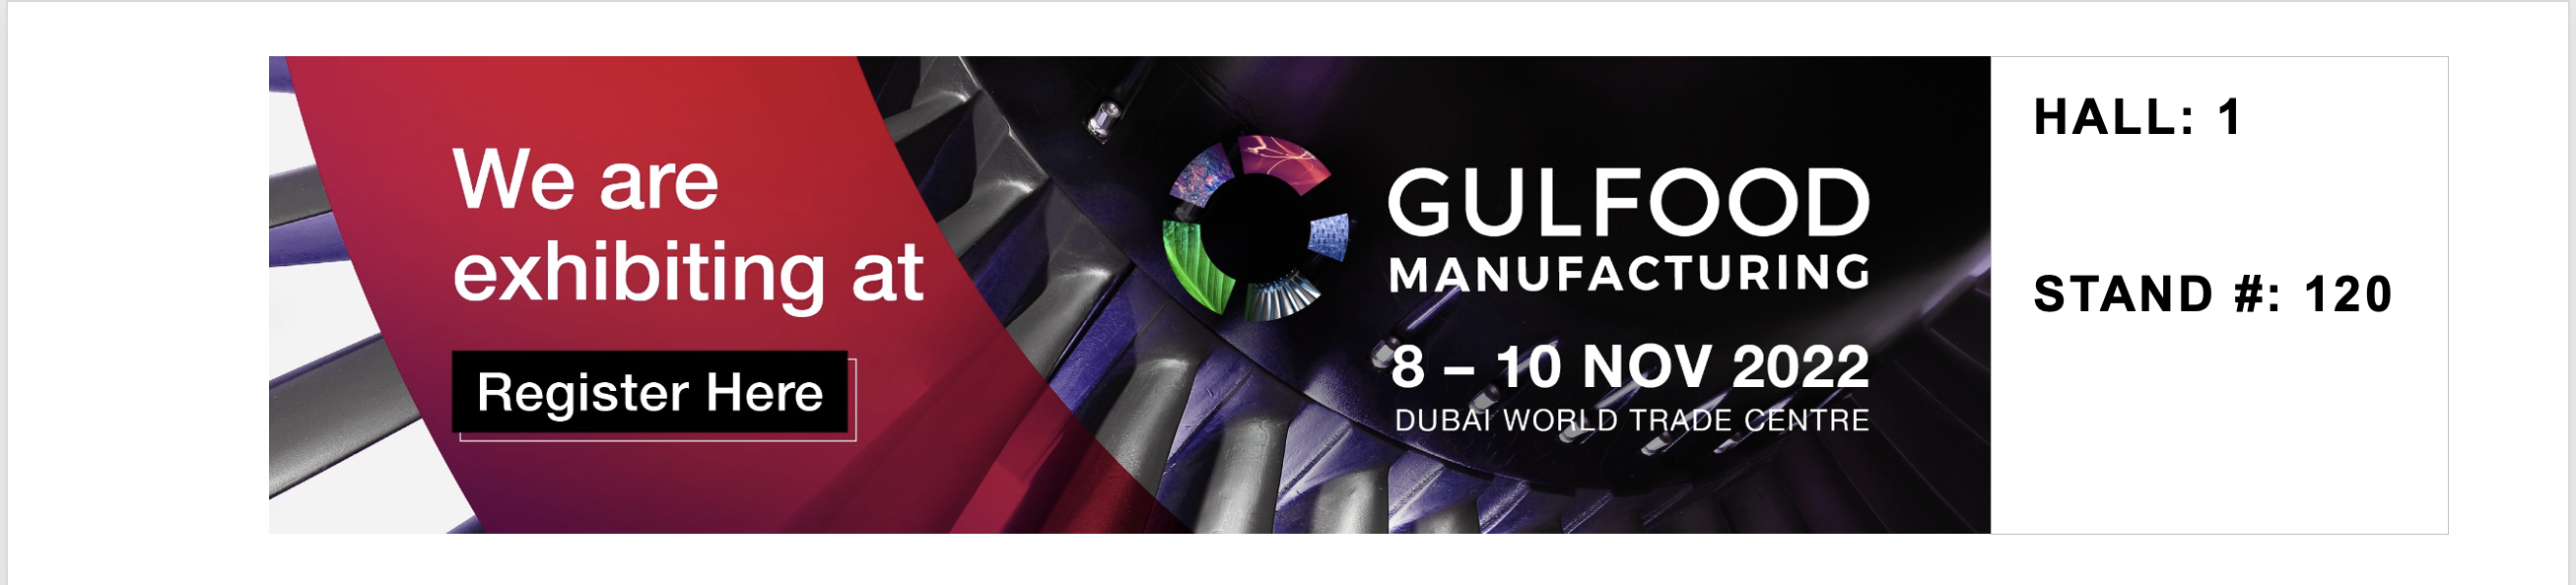 Solve Your Production Challenges
at Gulfood Manufacturing